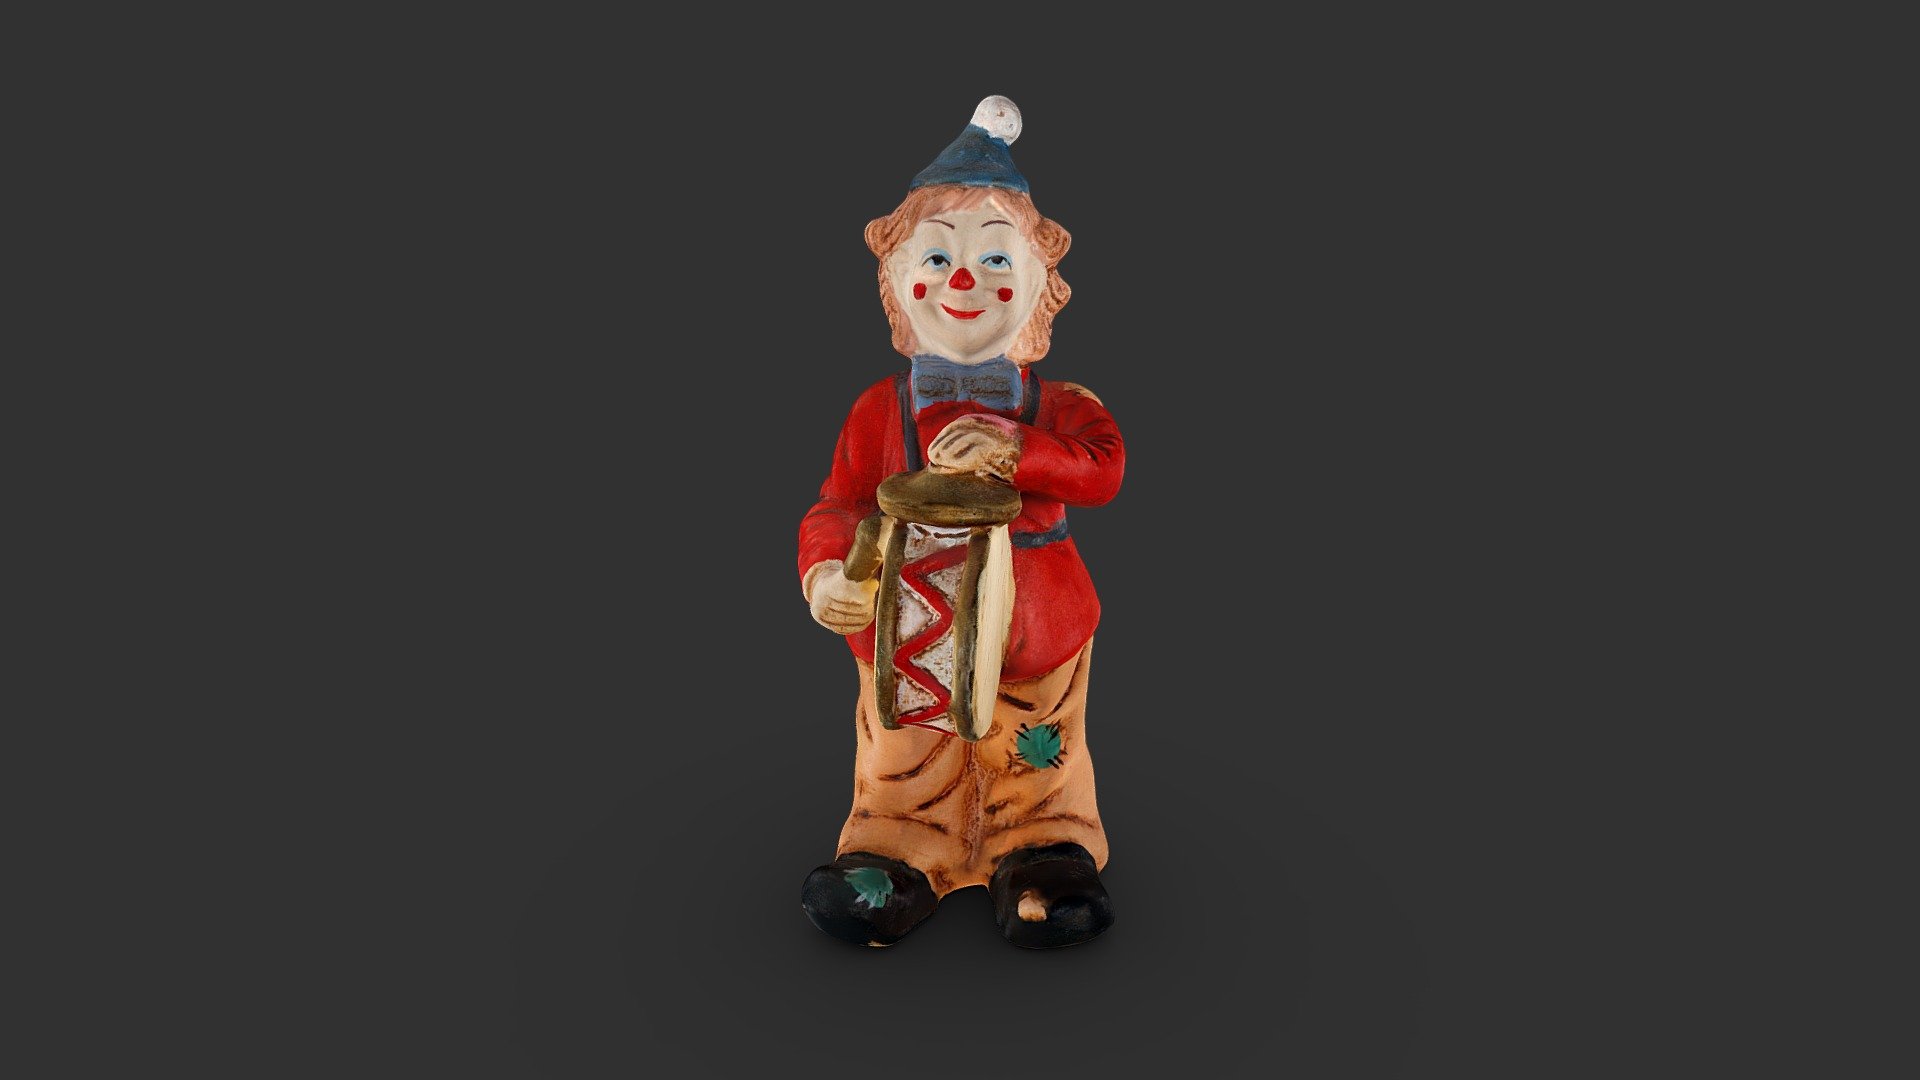 A happy clown statuette playing his drum.
Captured with a Canon 800D with CPL filter 3d model